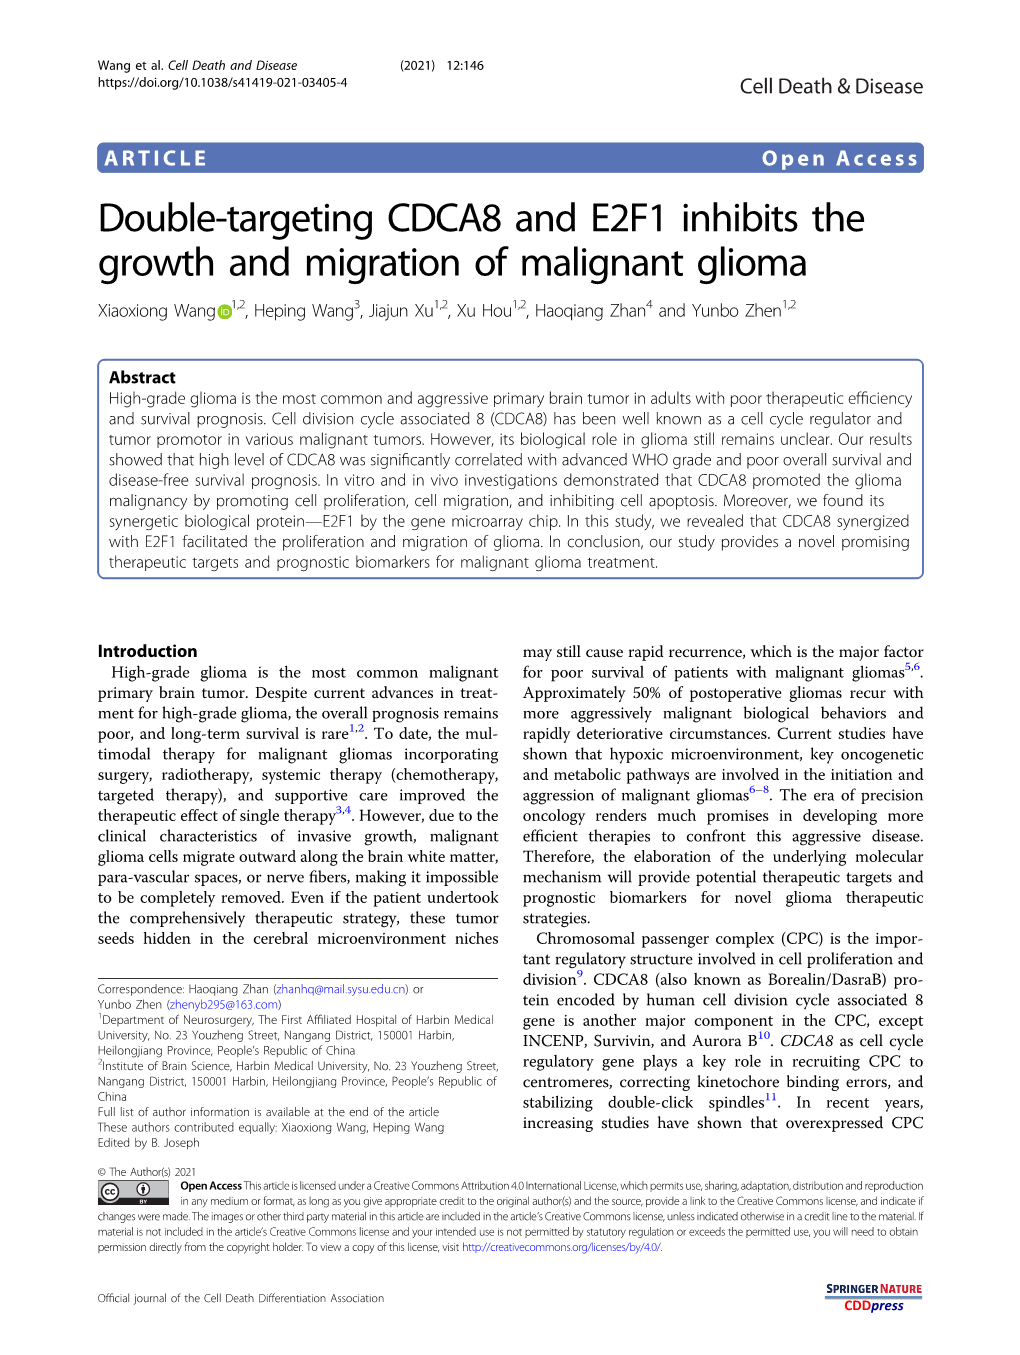 Double-Targeting CDCA8 and E2F1 Inhibits the Growth and Migration Of